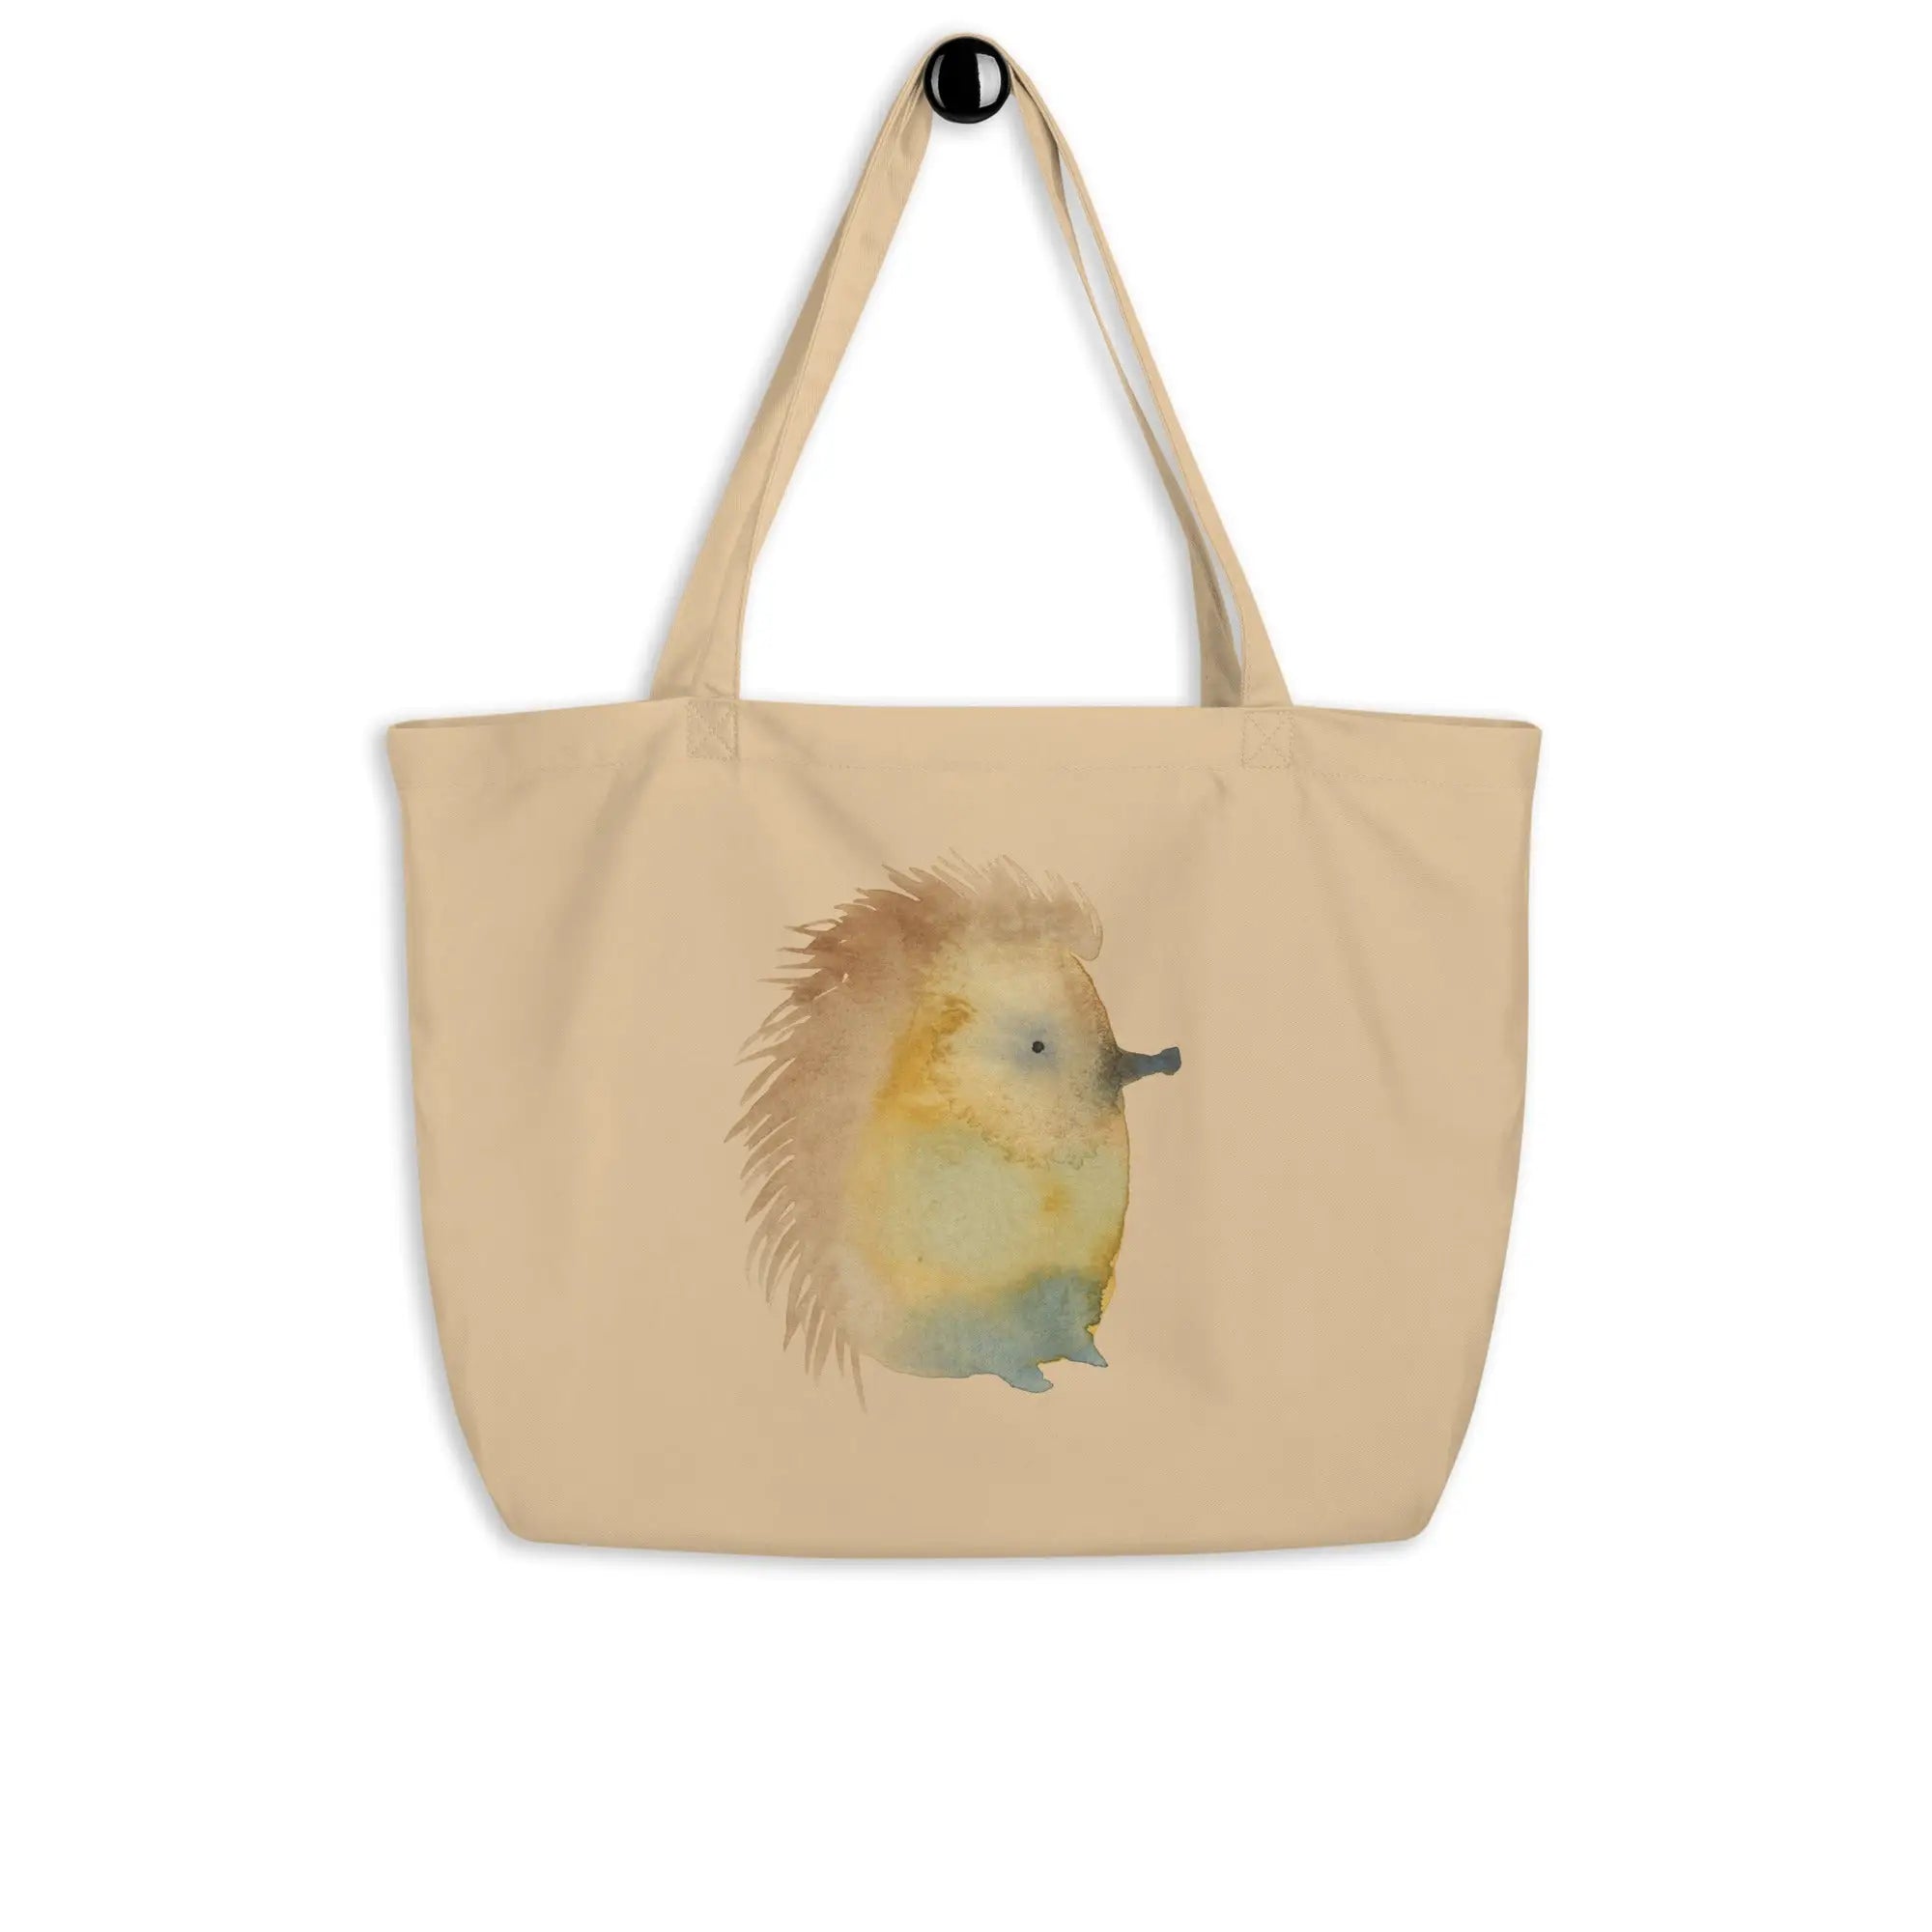 Organic Cotton Tote Bag with Watercolor Hedge Illustration